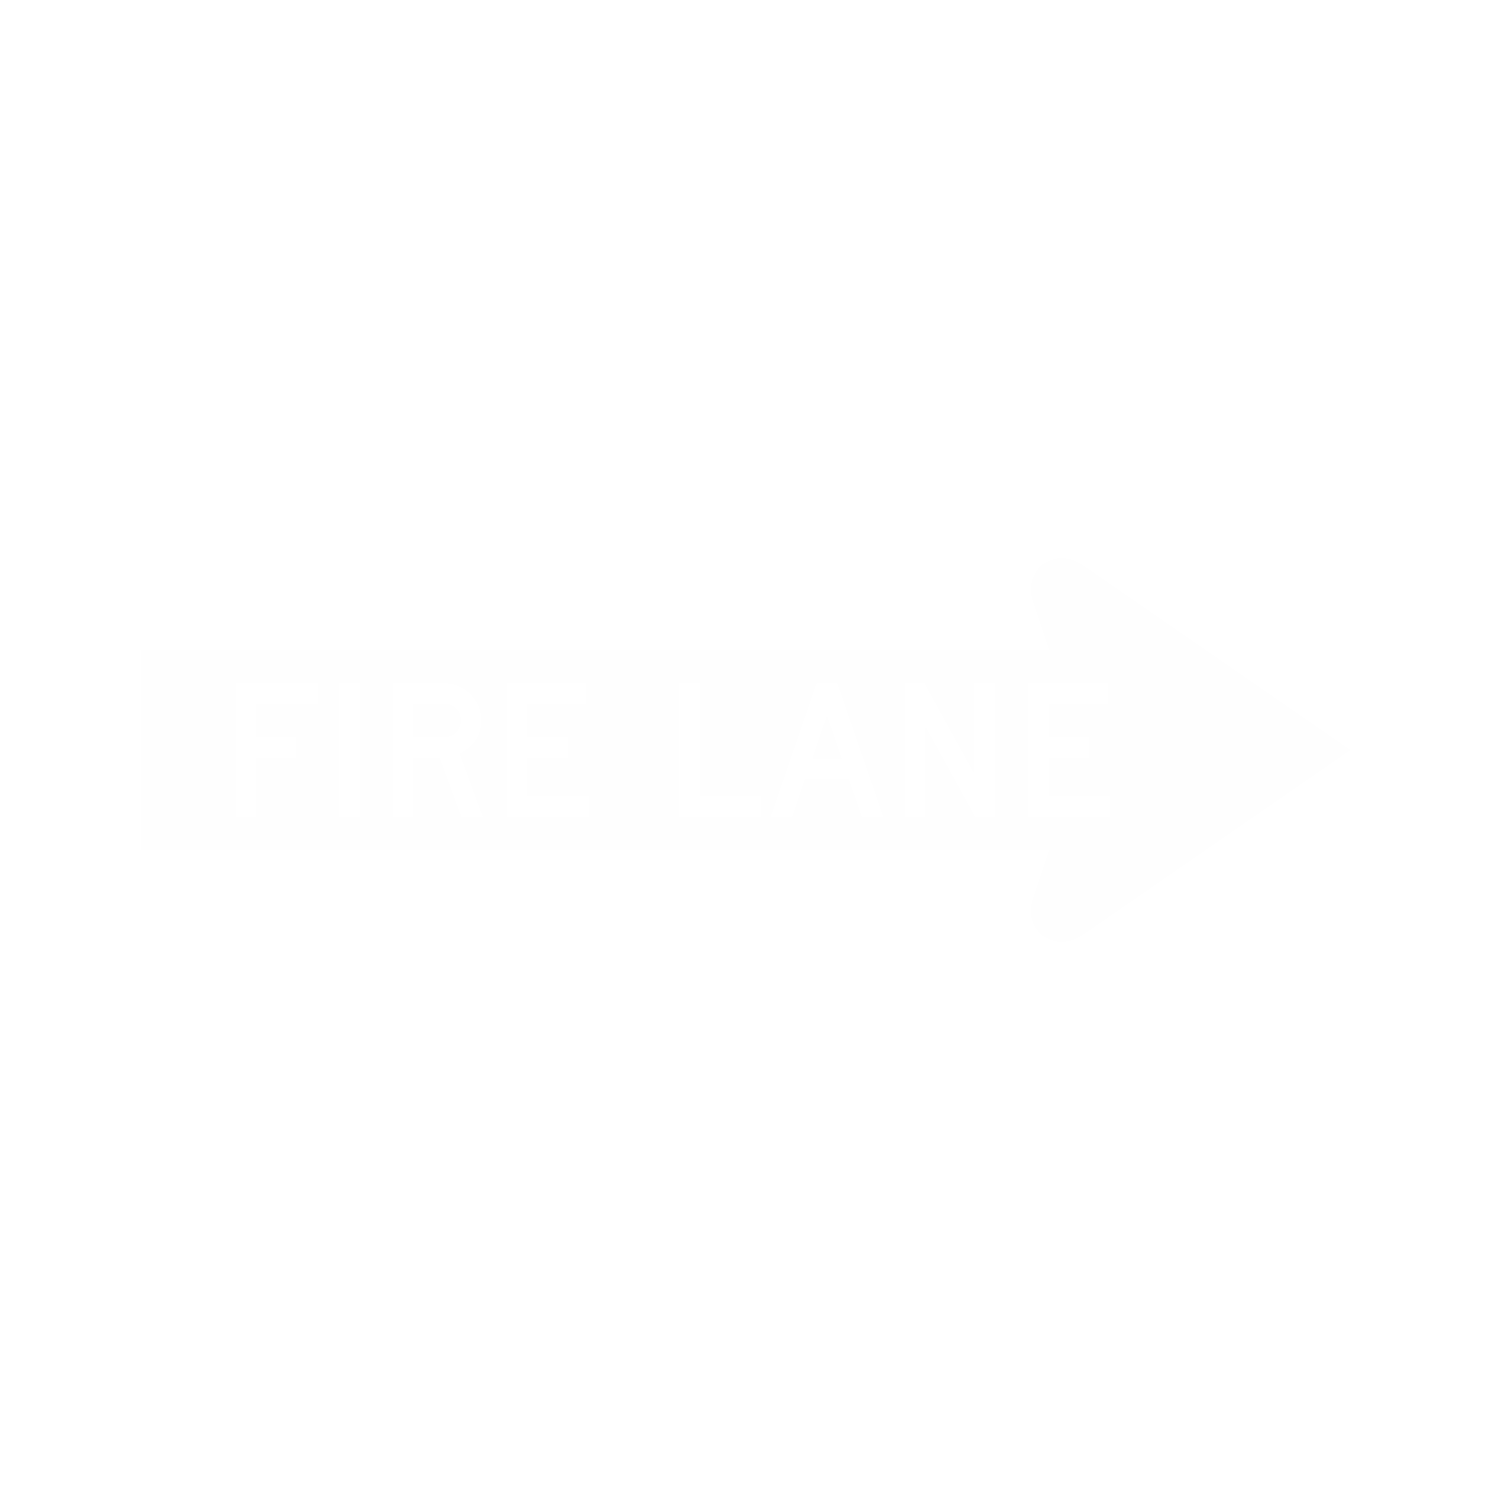 Fire Lane Directional Parking Sign